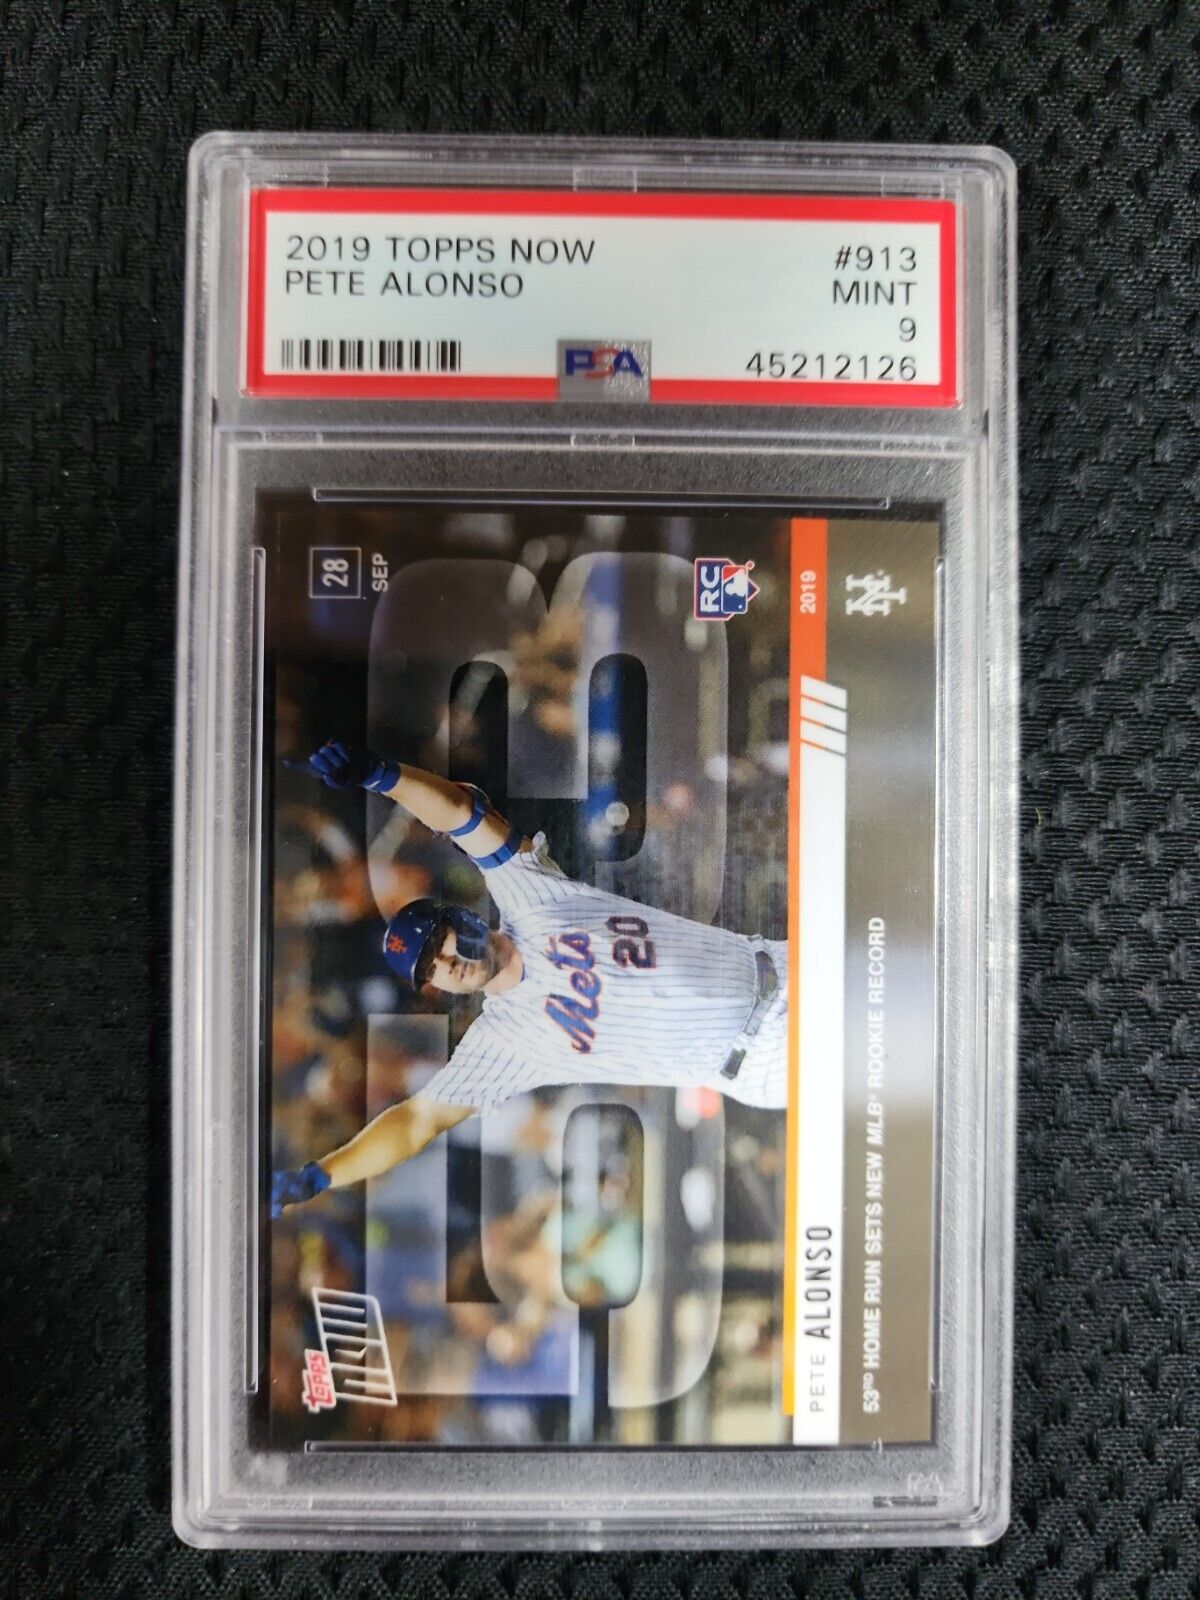 2019 Topps Now #913 Pete Alonso PSA 9 Mint RC Rookie Card